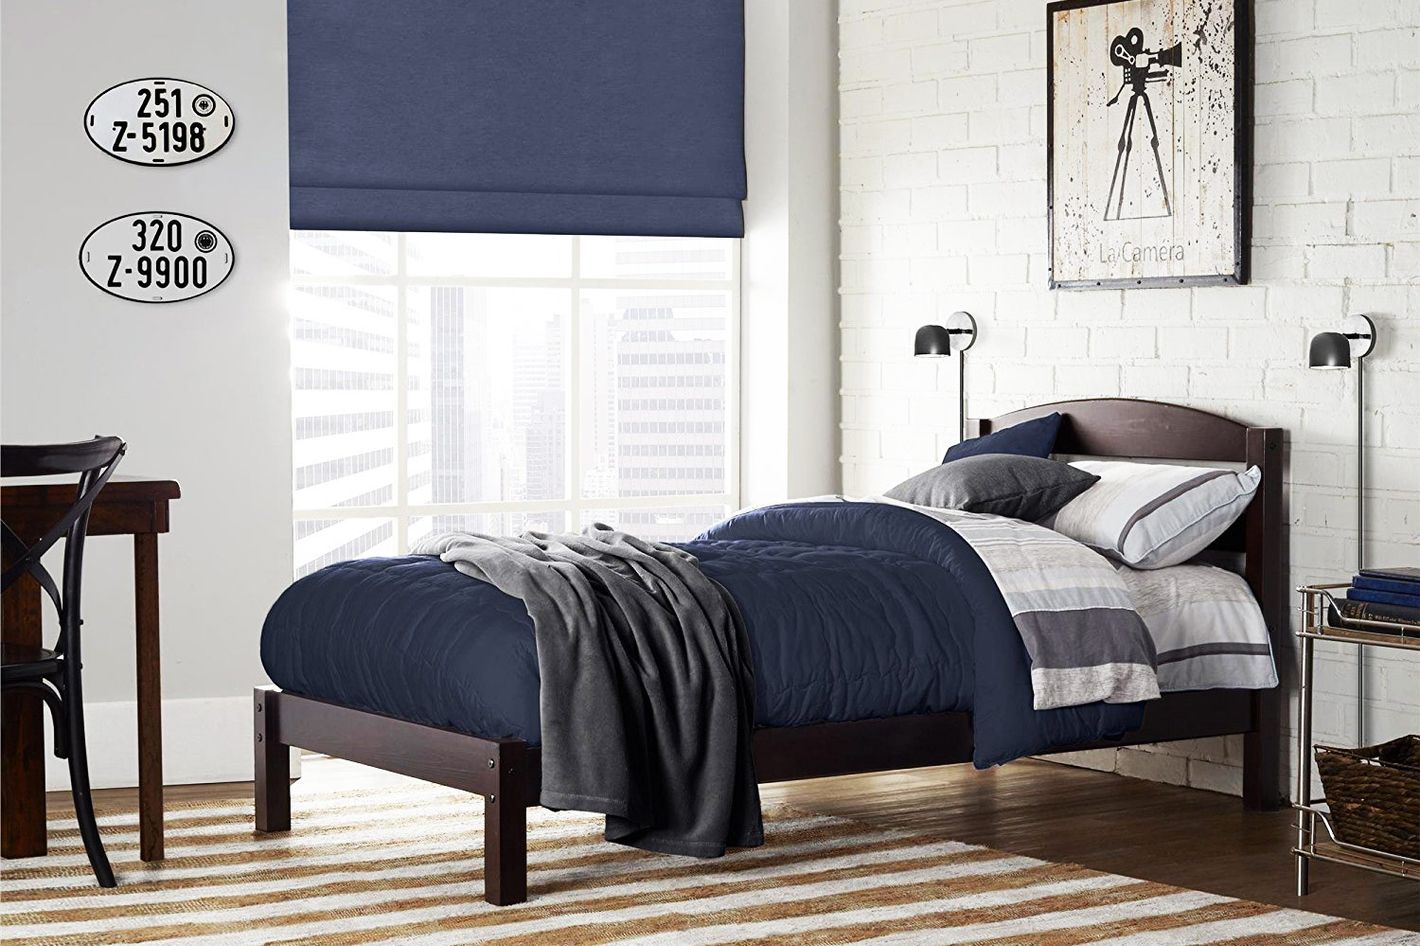 12 Best Twin Beds For Kids 2019, Twin Bed With Nightstand